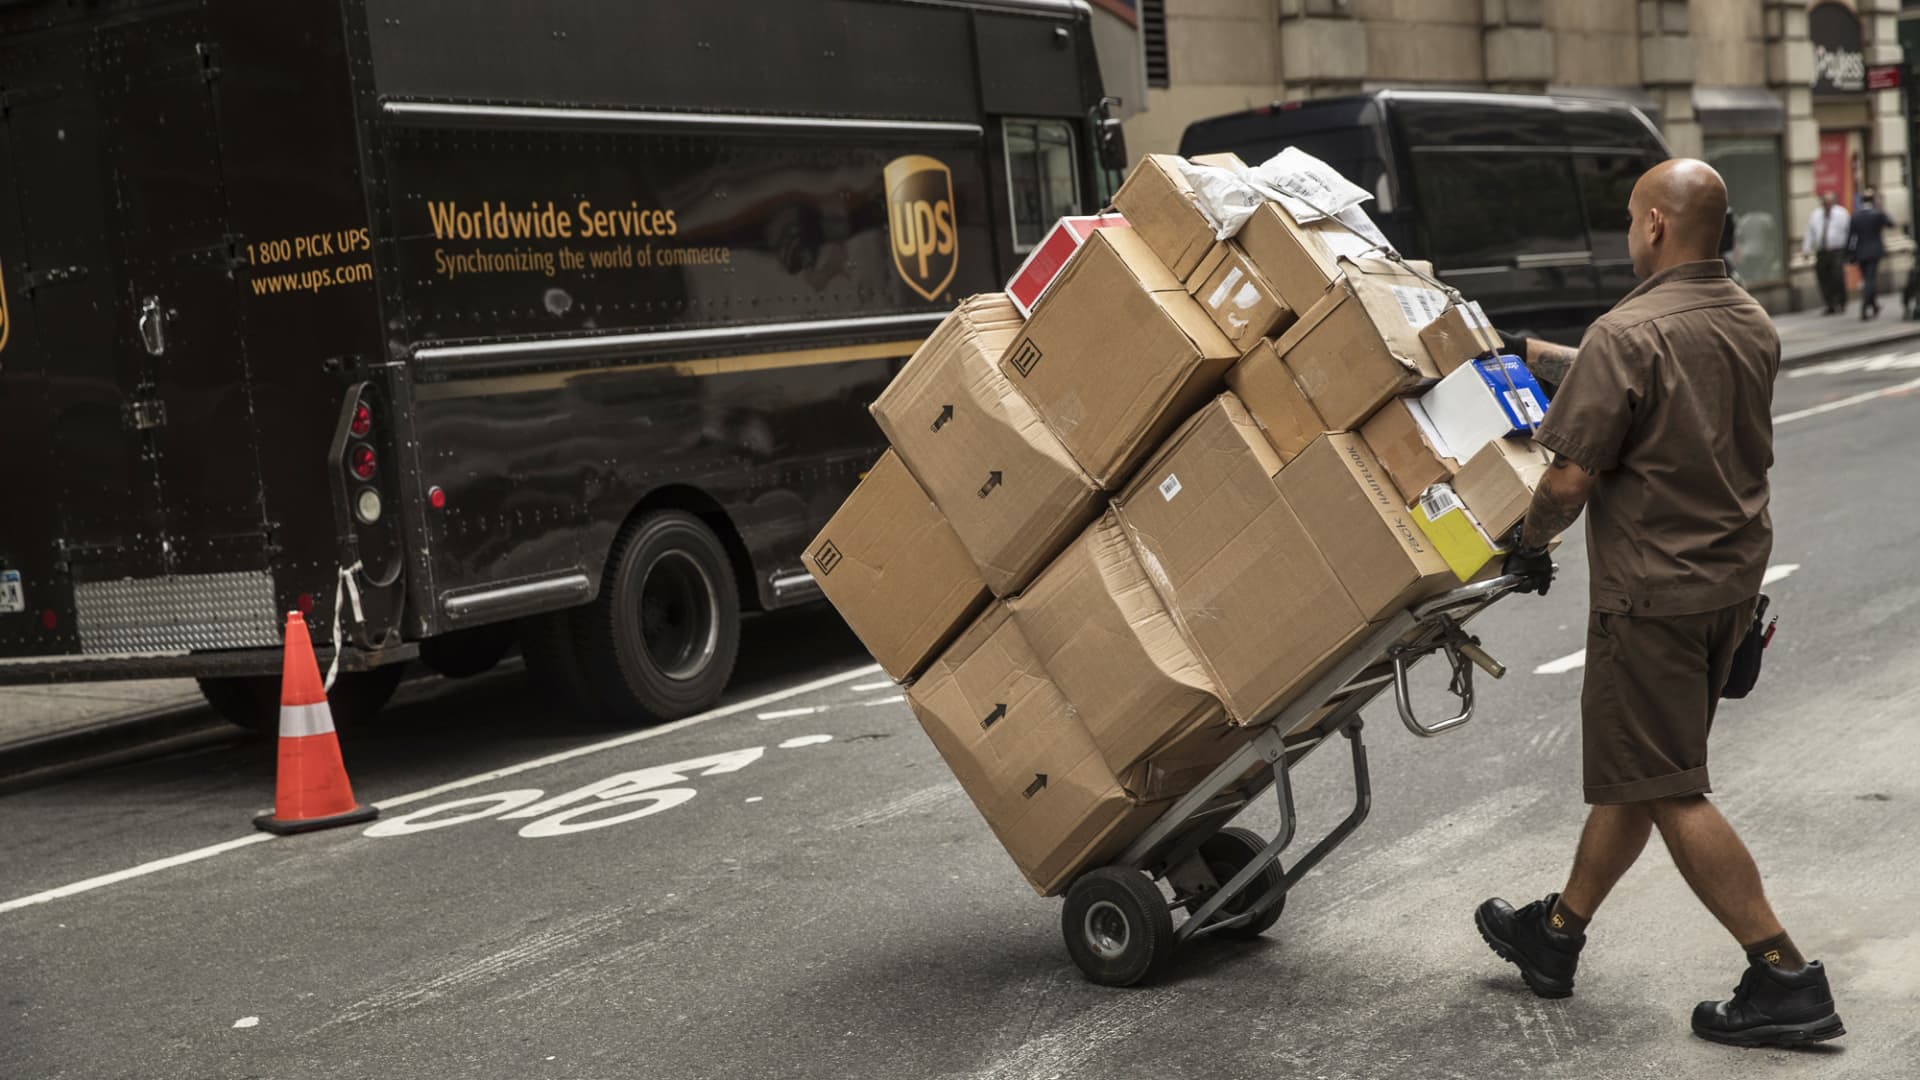 ups delivery man